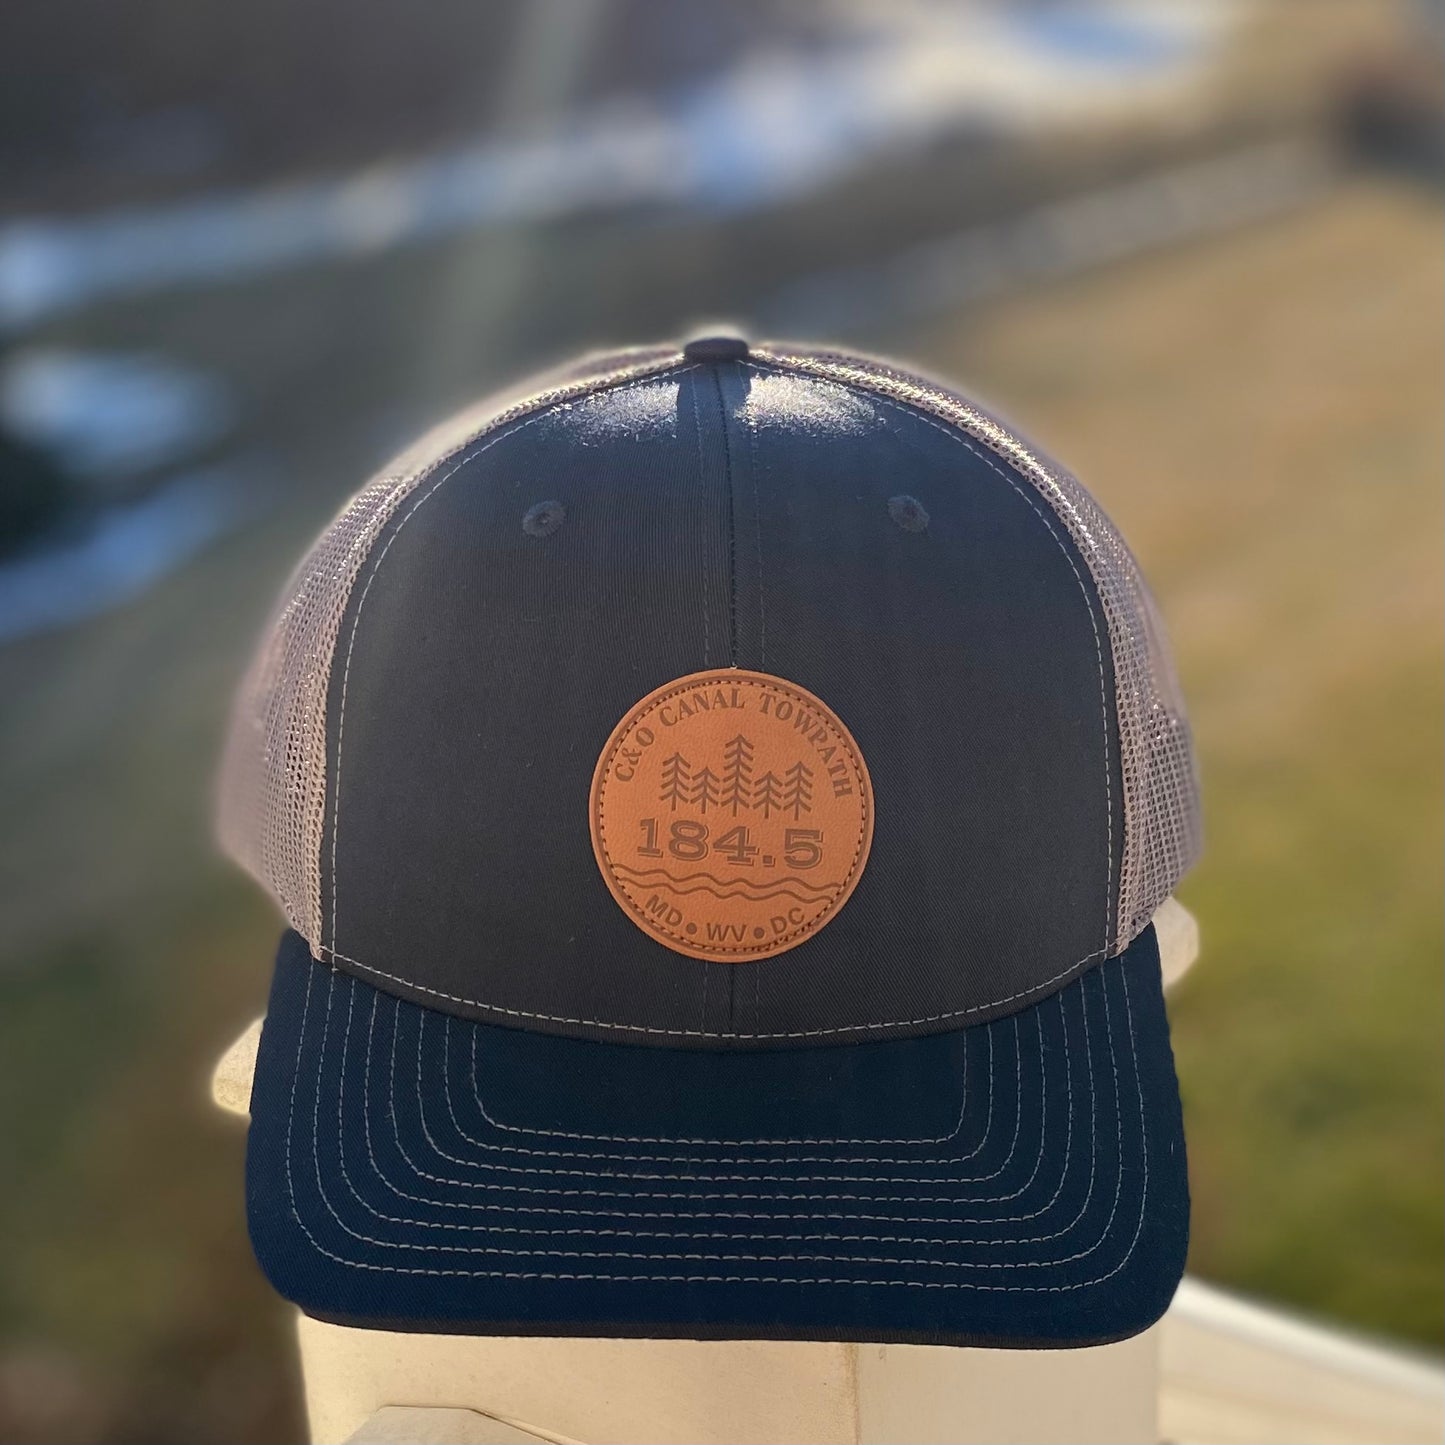 c and o canal trucker hat black and grey